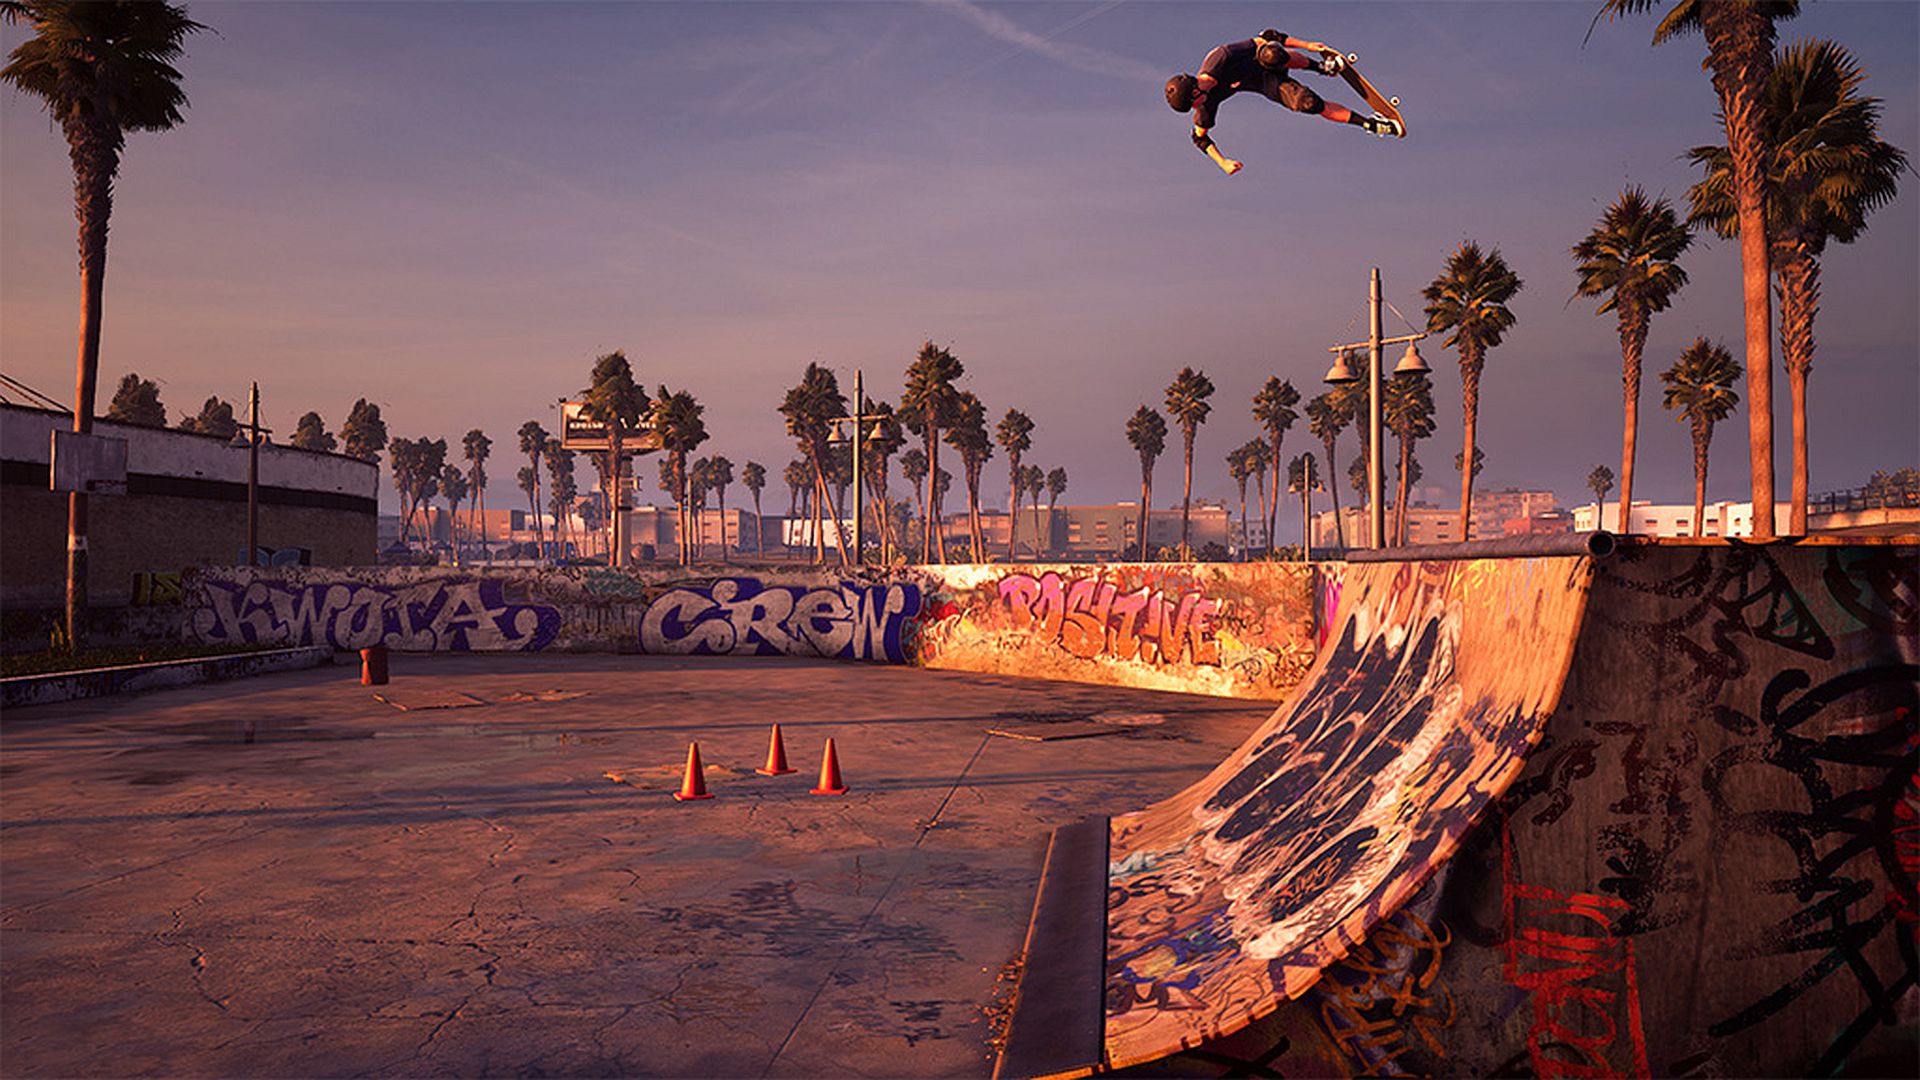 It inspired a generation': Tony Hawk on how the Pro Skater video